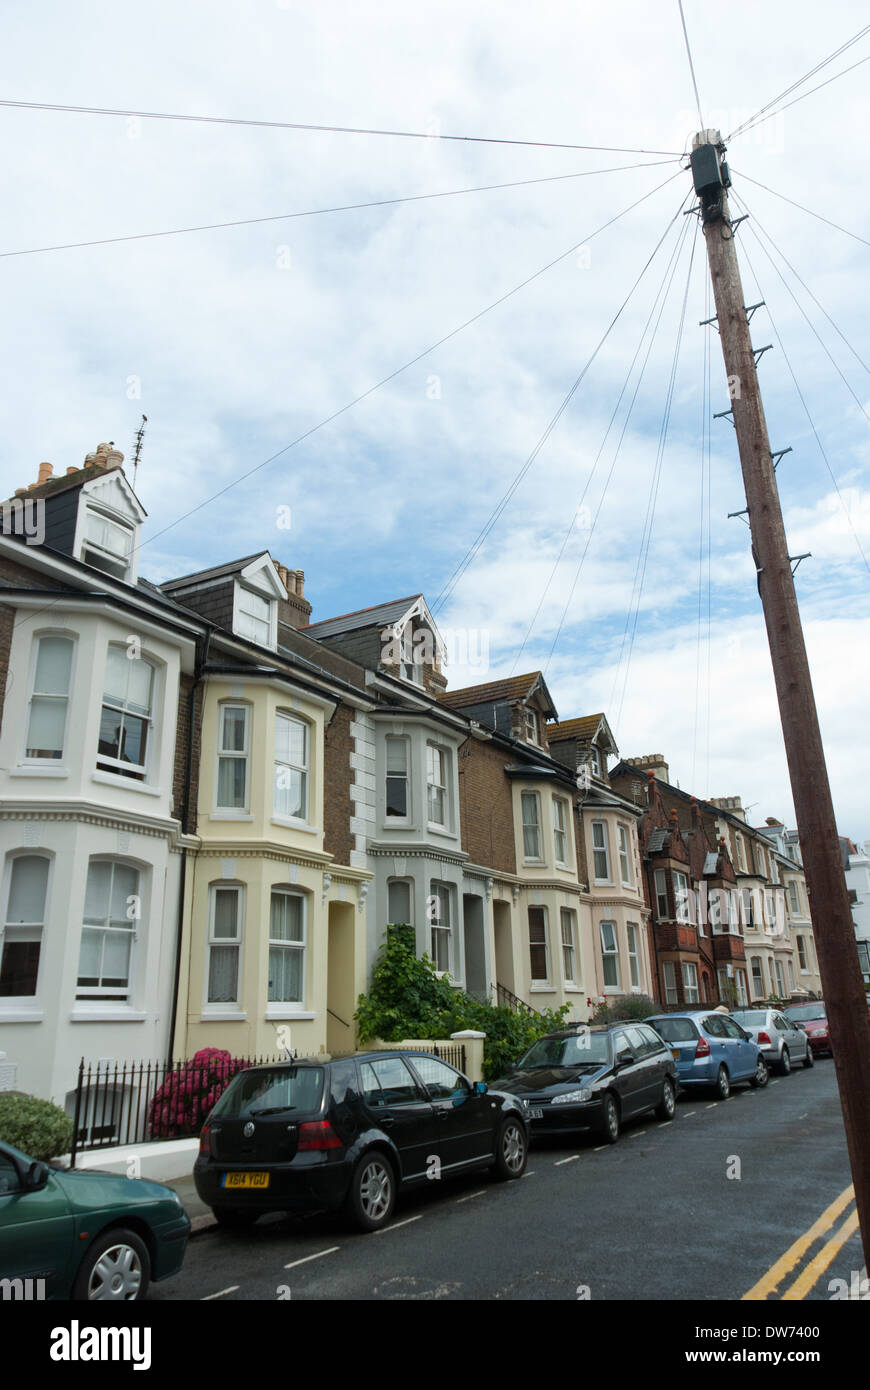 A quit residential street in the English sea side town of Deal in Kent, UK. Stock Photo